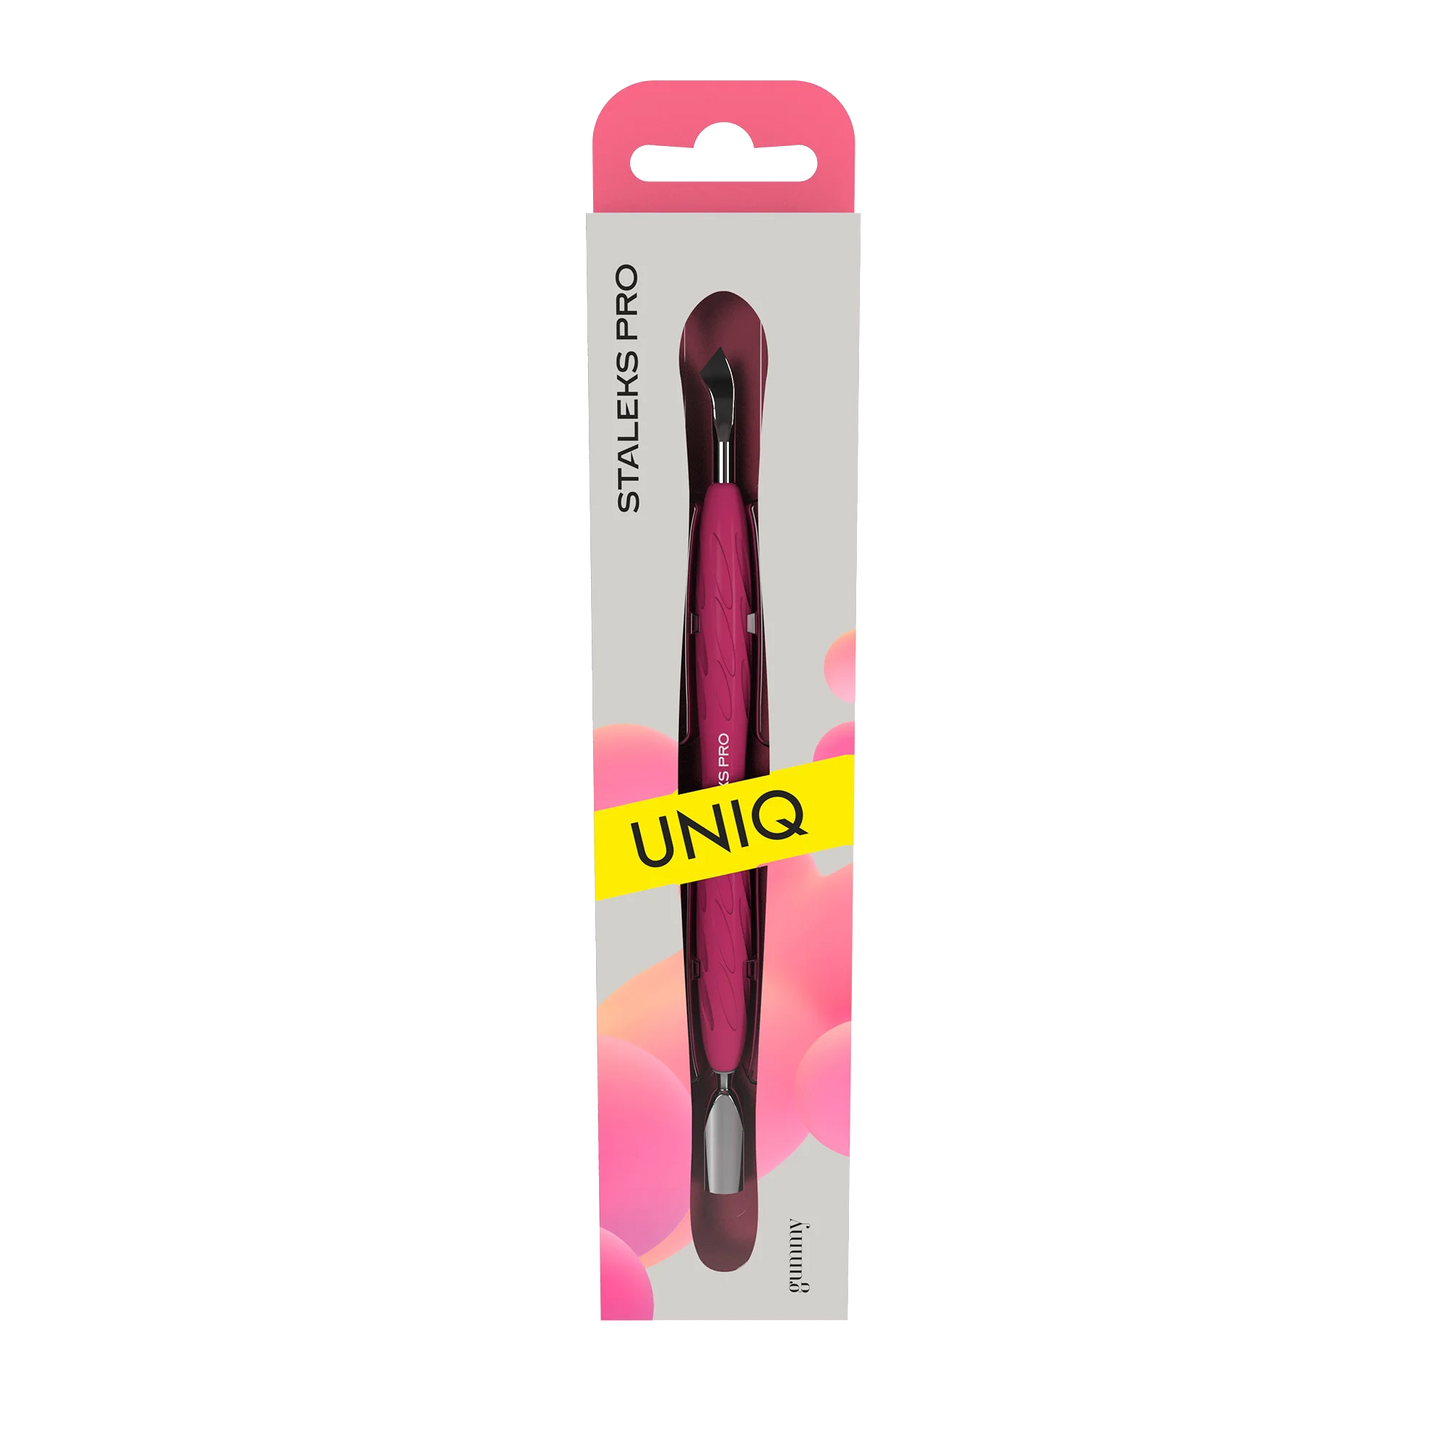 Manicure Pusher With Silicone Handle "Gummy" UNIQ 10 TYPE 4.2 (Narrow Rounded Pusher + Bent Blade) -PQ-10/4.2